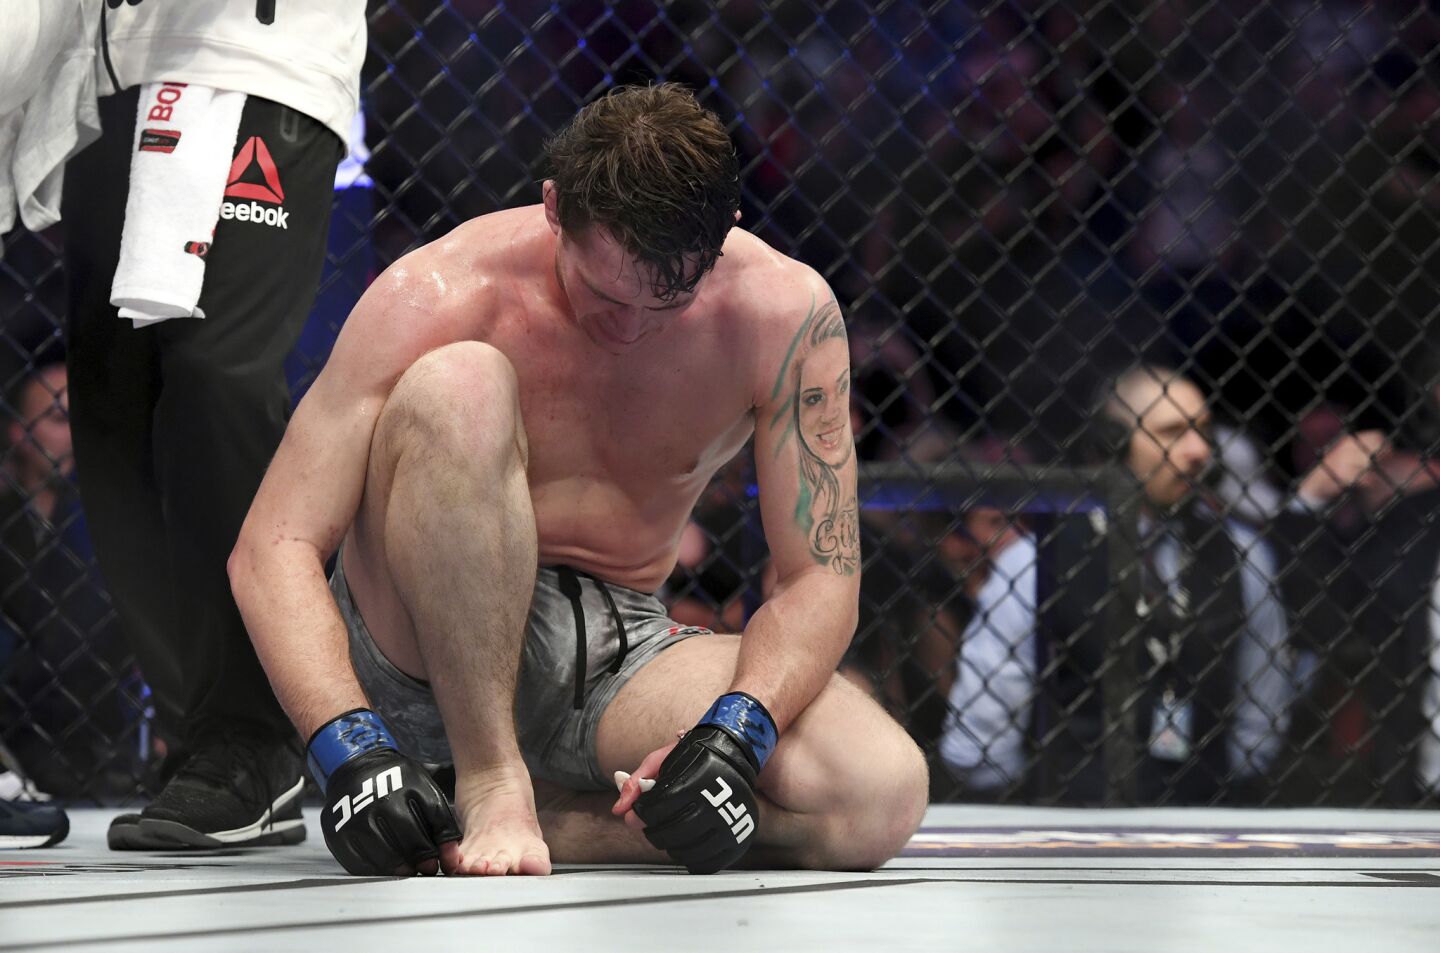 Darren Till sits on the mat after losing by submission to Tyron Woodley in their welterweight title mixed martial arts bout at UFC 228 on Saturday, Sept. 8, 2018, in Dallas. (AP Photo/Jeffrey McWhorter)